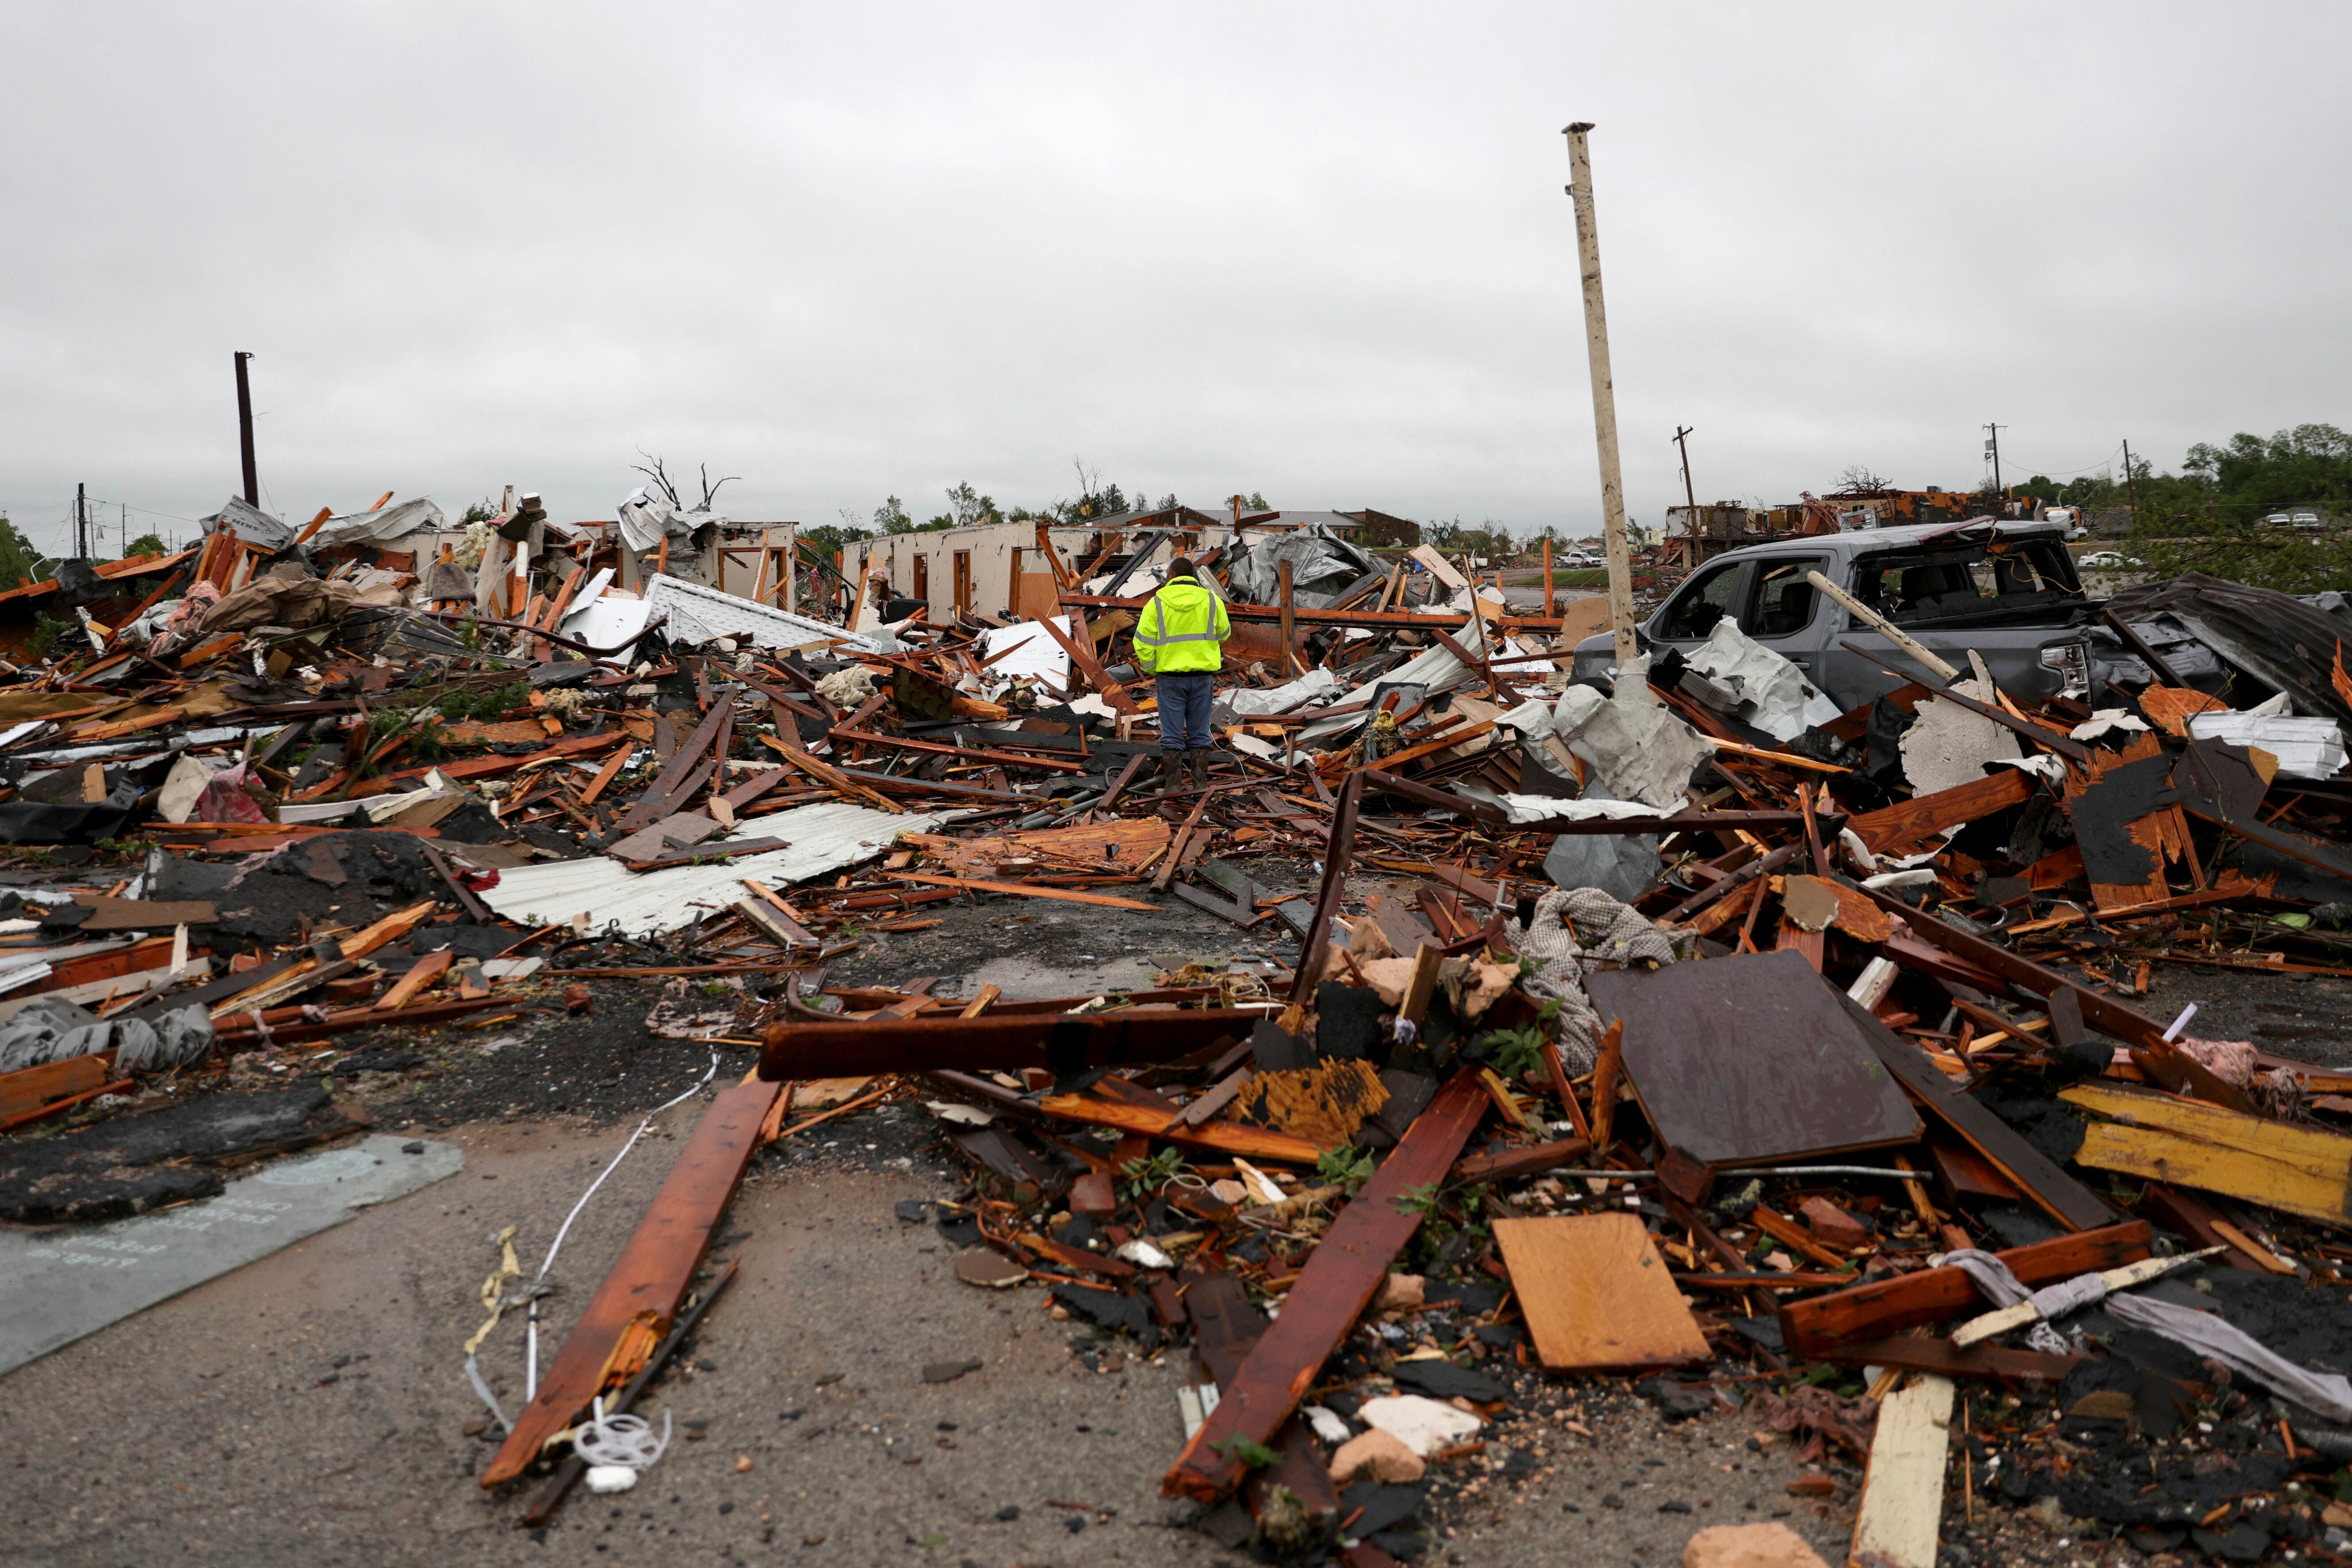 A man is surrounded by tornado damage after severe storms moved through the night before in Sulphur, Oklahoma last week